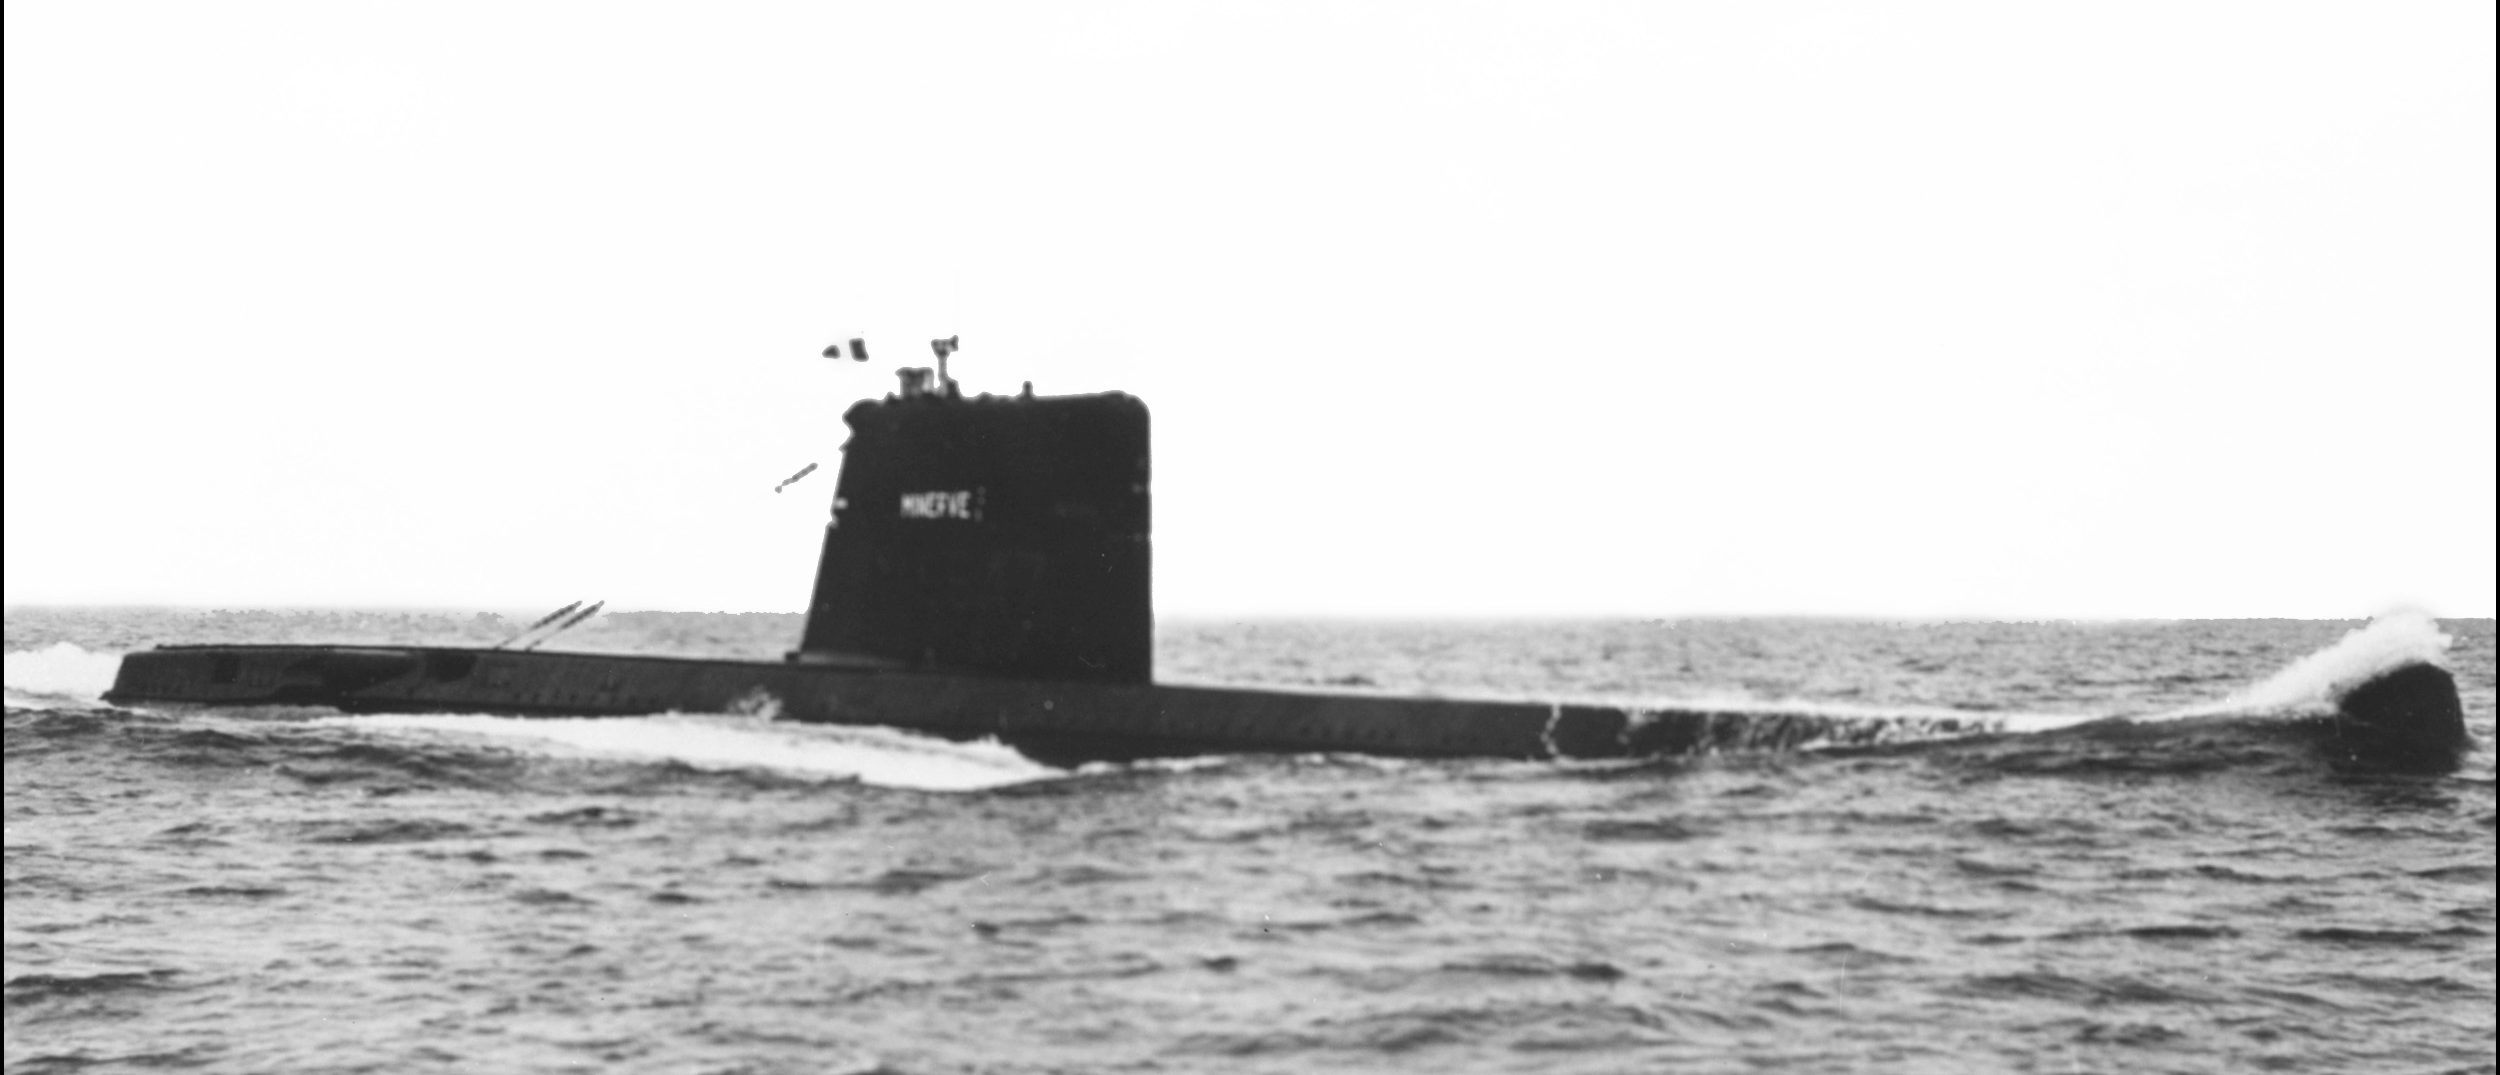 Search Team Finds French Submarine More Than 50 Years After Disappearance | The Daily ...2500 x 1075